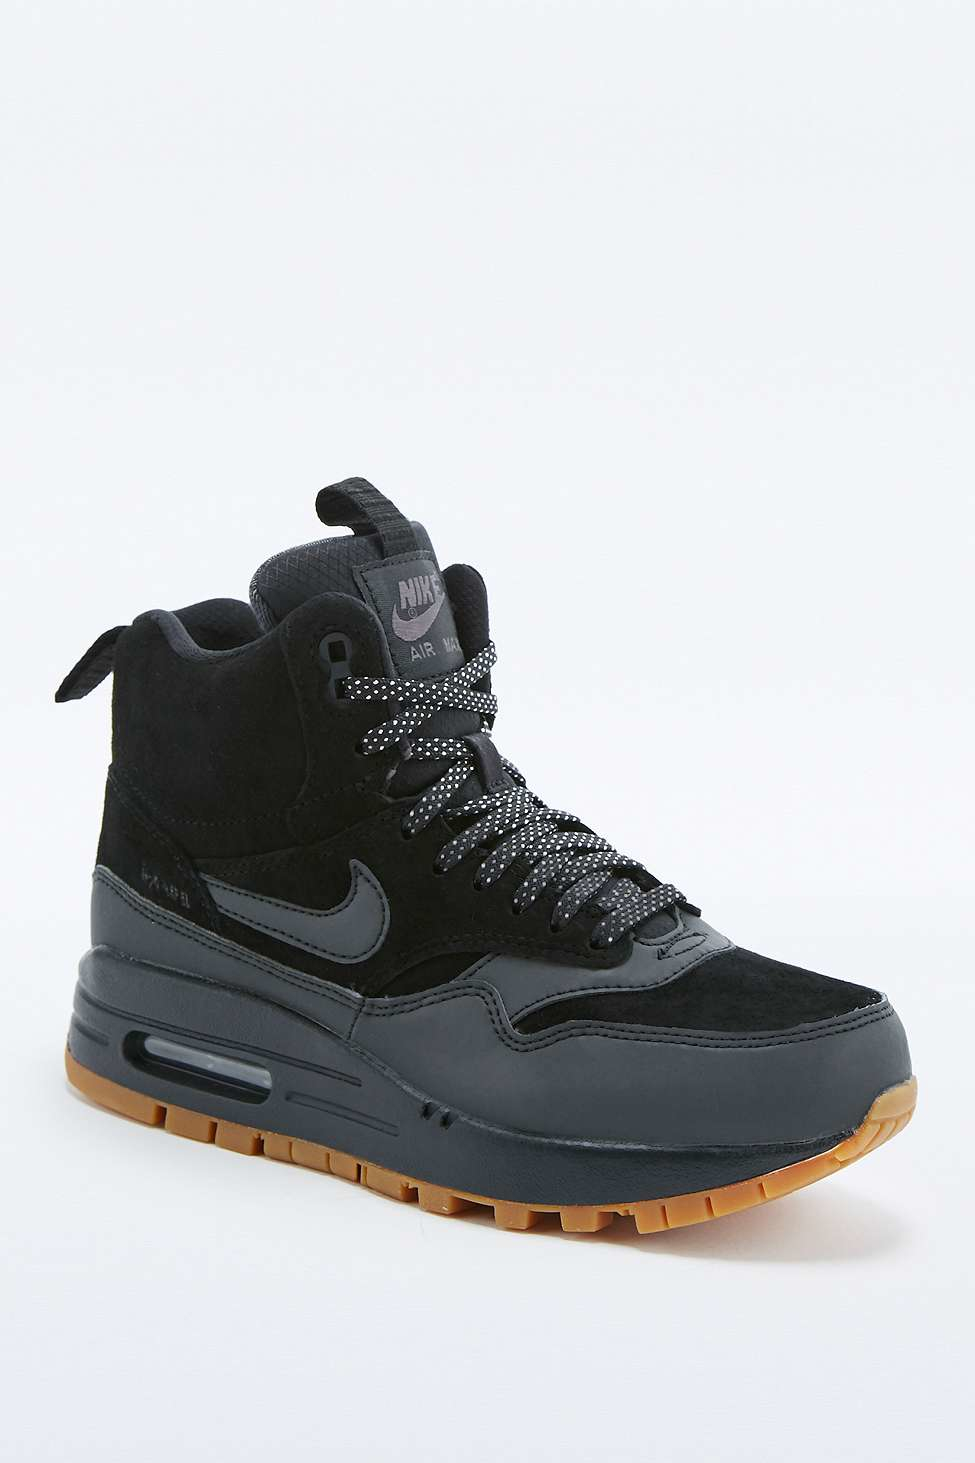 trainer boots nike